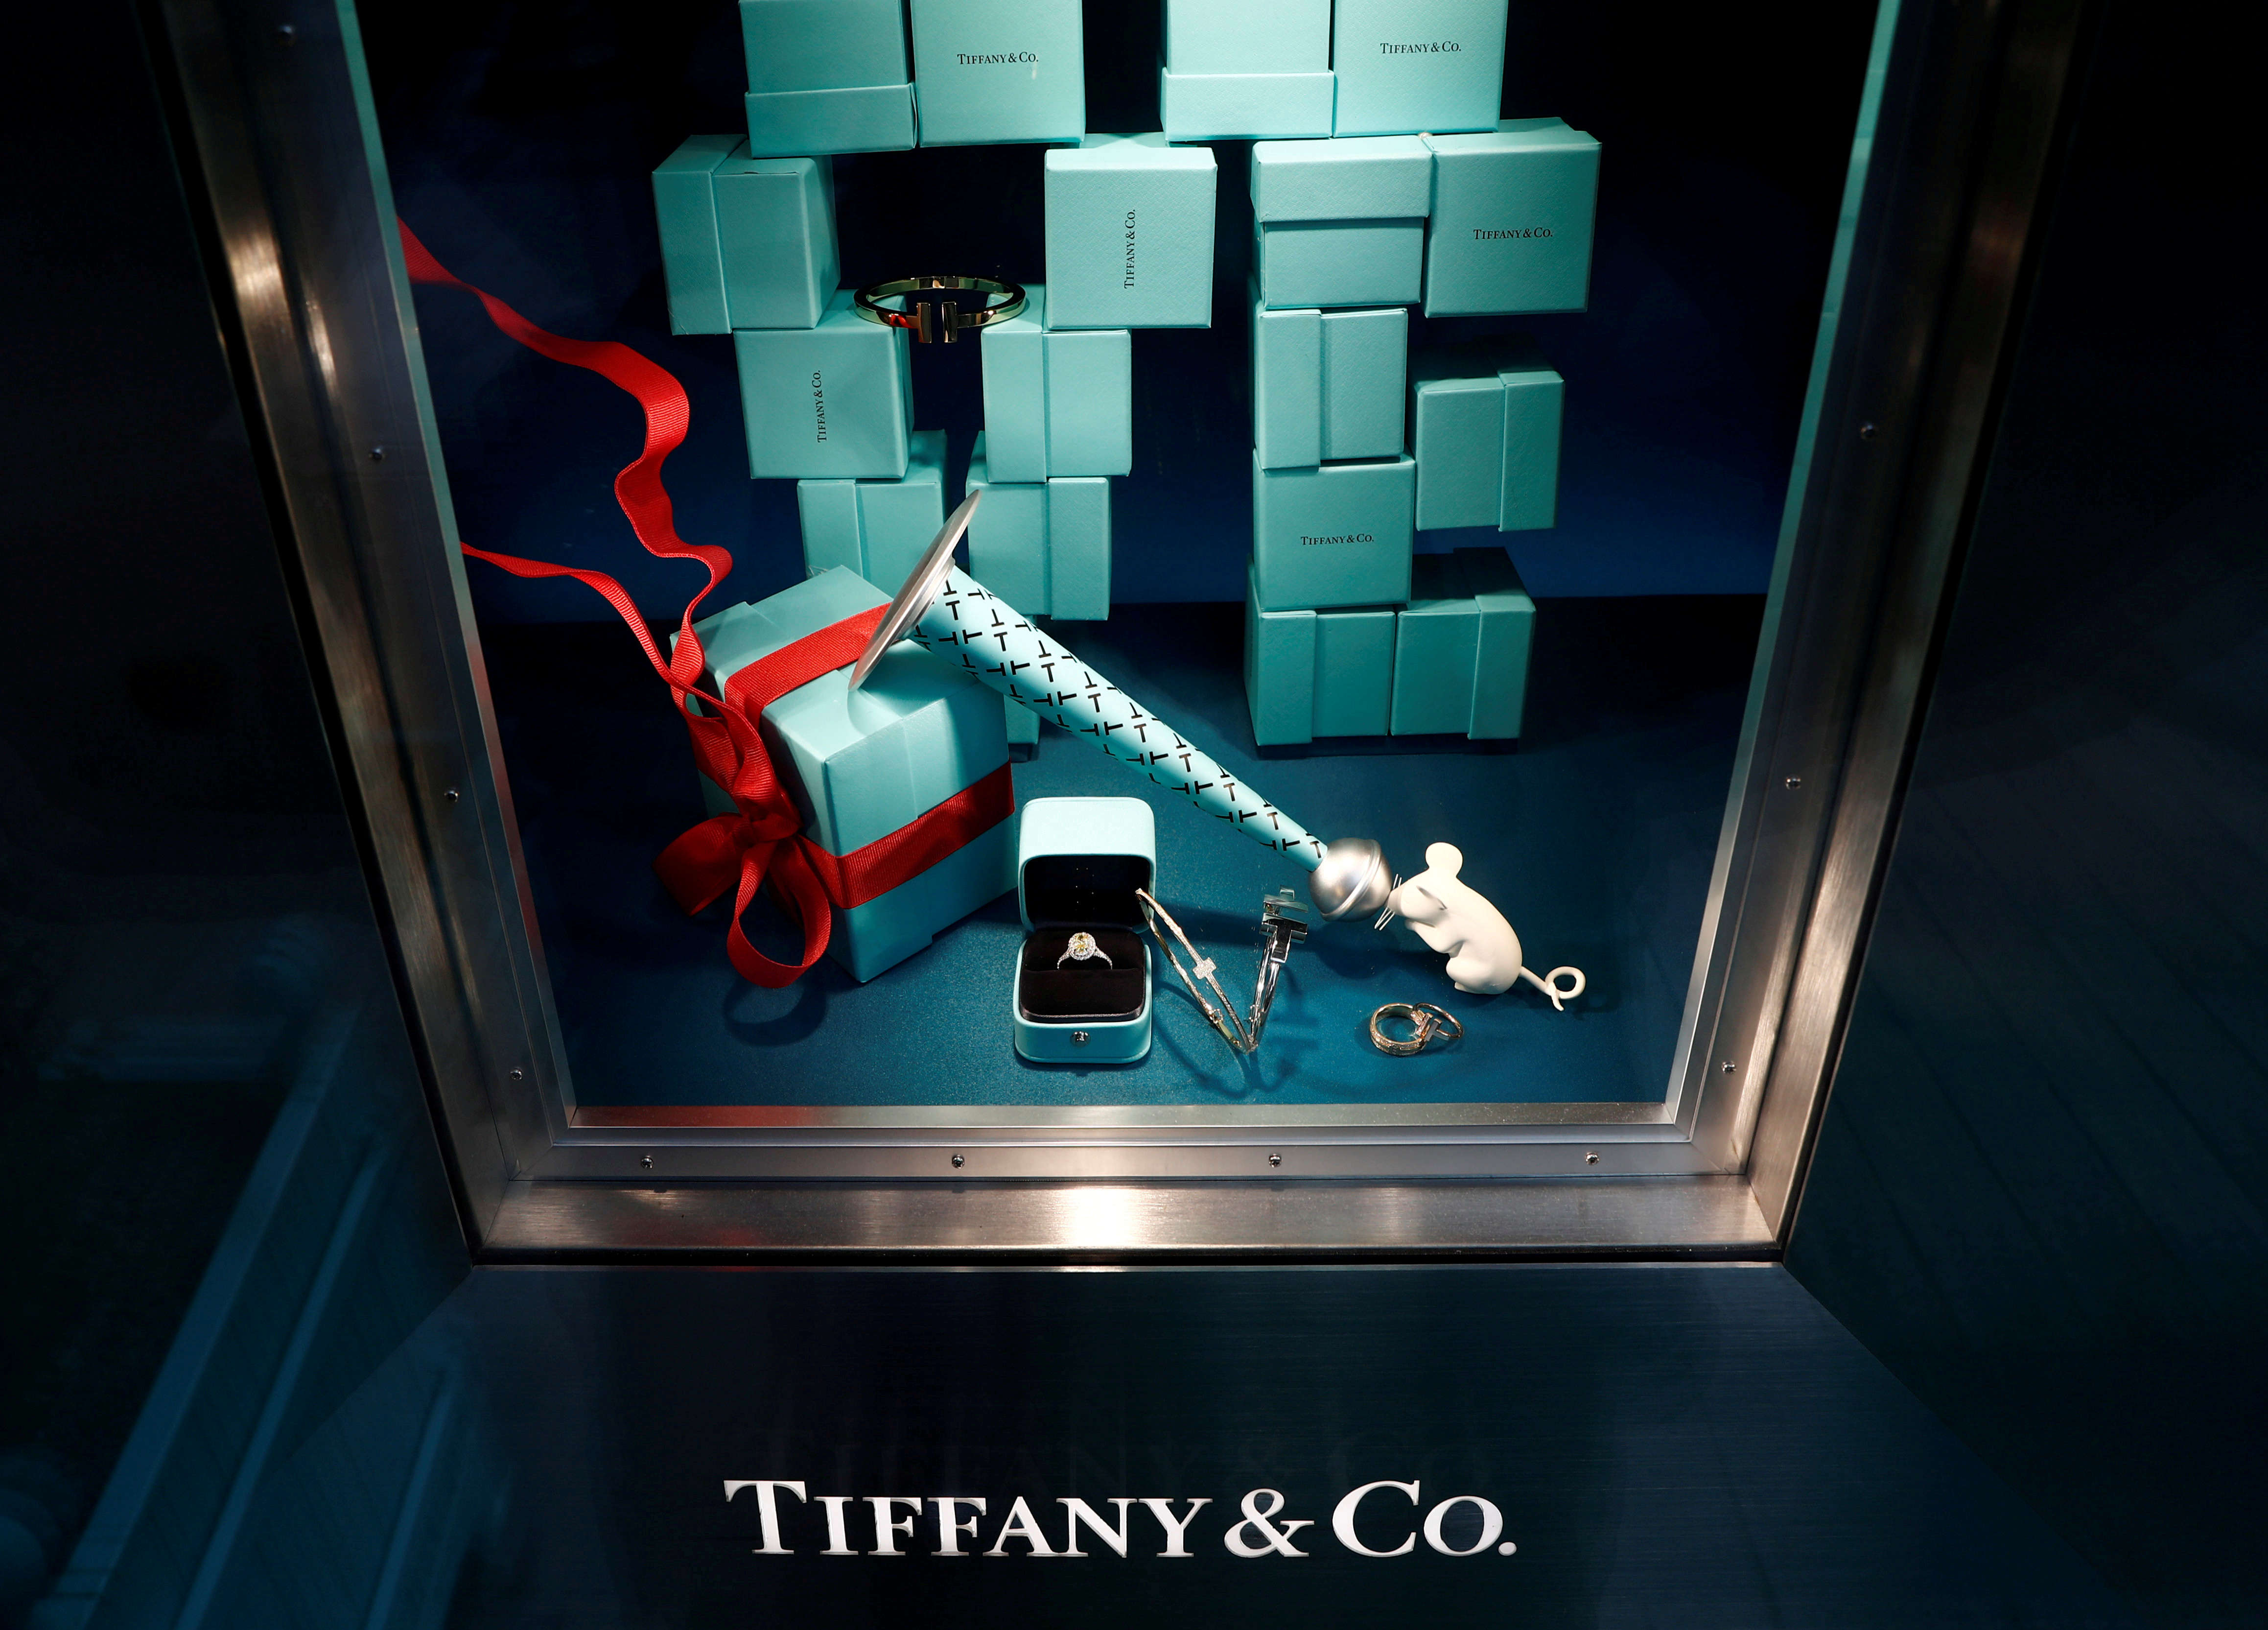 LVMH & Tiffany: The master negotiator is at play again! – Marketing,  luxury, branding and more….